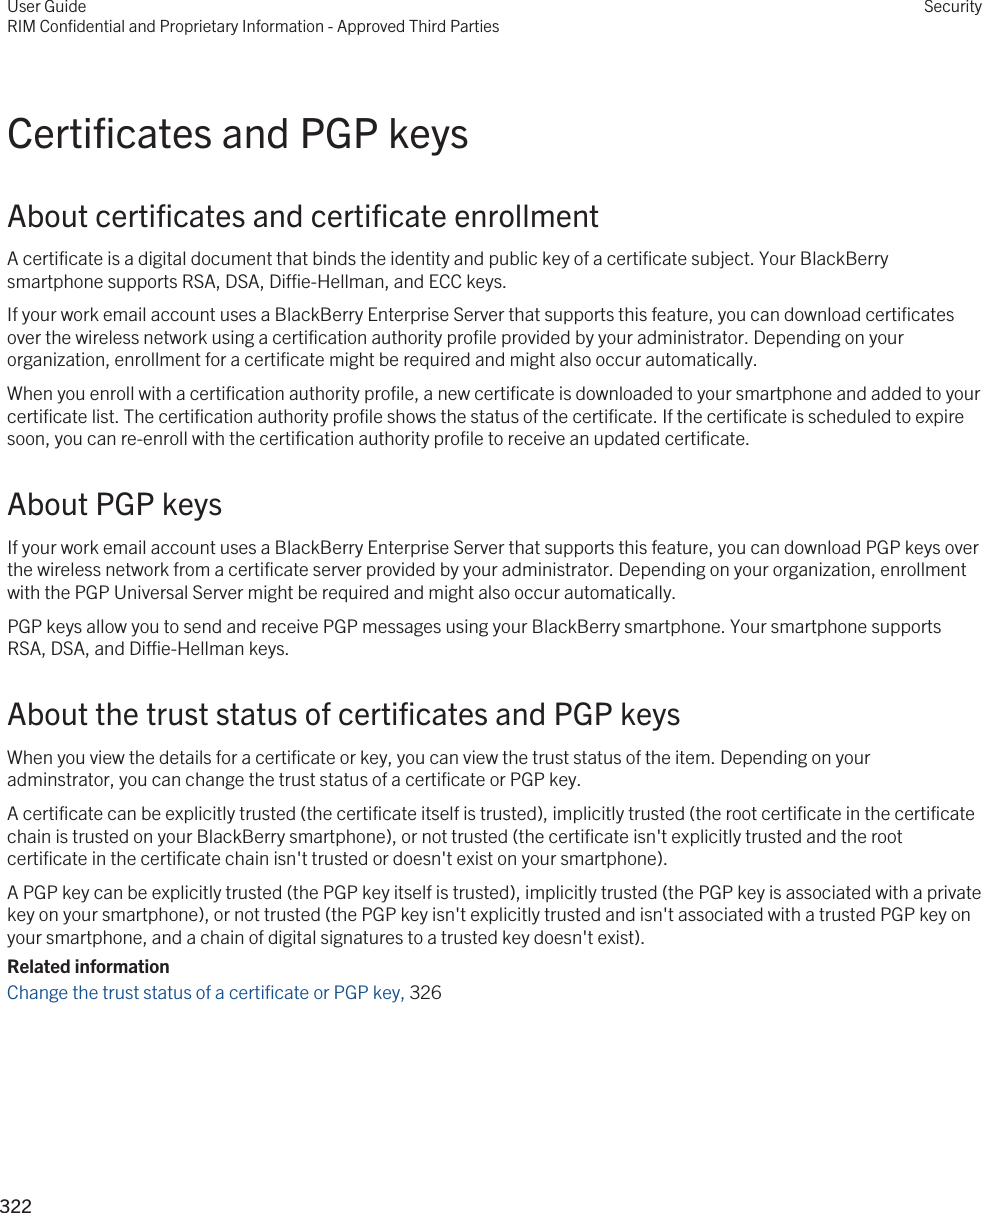 Certificates and PGP keysAbout certificates and certificate enrollmentA certificate is a digital document that binds the identity and public key of a certificate subject. Your BlackBerry smartphone supports RSA, DSA, Diffie-Hellman, and ECC keys.If your work email account uses a BlackBerry Enterprise Server that supports this feature, you can download certificates over the wireless network using a certification authority profile provided by your administrator. Depending on your organization, enrollment for a certificate might be required and might also occur automatically.When you enroll with a certification authority profile, a new certificate is downloaded to your smartphone and added to your certificate list. The certification authority profile shows the status of the certificate. If the certificate is scheduled to expire soon, you can re-enroll with the certification authority profile to receive an updated certificate.About PGP keysIf your work email account uses a BlackBerry Enterprise Server that supports this feature, you can download PGP keys over the wireless network from a certificate server provided by your administrator. Depending on your organization, enrollment with the PGP Universal Server might be required and might also occur automatically.PGP keys allow you to send and receive PGP messages using your BlackBerry smartphone. Your smartphone supports RSA, DSA, and Diffie-Hellman keys.About the trust status of certificates and PGP keysWhen you view the details for a certificate or key, you can view the trust status of the item. Depending on your adminstrator, you can change the trust status of a certificate or PGP key.A certificate can be explicitly trusted (the certificate itself is trusted), implicitly trusted (the root certificate in the certificate chain is trusted on your BlackBerry smartphone), or not trusted (the certificate isn&apos;t explicitly trusted and the root certificate in the certificate chain isn&apos;t trusted or doesn&apos;t exist on your smartphone).A PGP key can be explicitly trusted (the PGP key itself is trusted), implicitly trusted (the PGP key is associated with a private key on your smartphone), or not trusted (the PGP key isn&apos;t explicitly trusted and isn&apos;t associated with a trusted PGP key on your smartphone, and a chain of digital signatures to a trusted key doesn&apos;t exist).Related informationChange the trust status of a certificate or PGP key, 326User GuideRIM Confidential and Proprietary Information - Approved Third PartiesSecurity322 